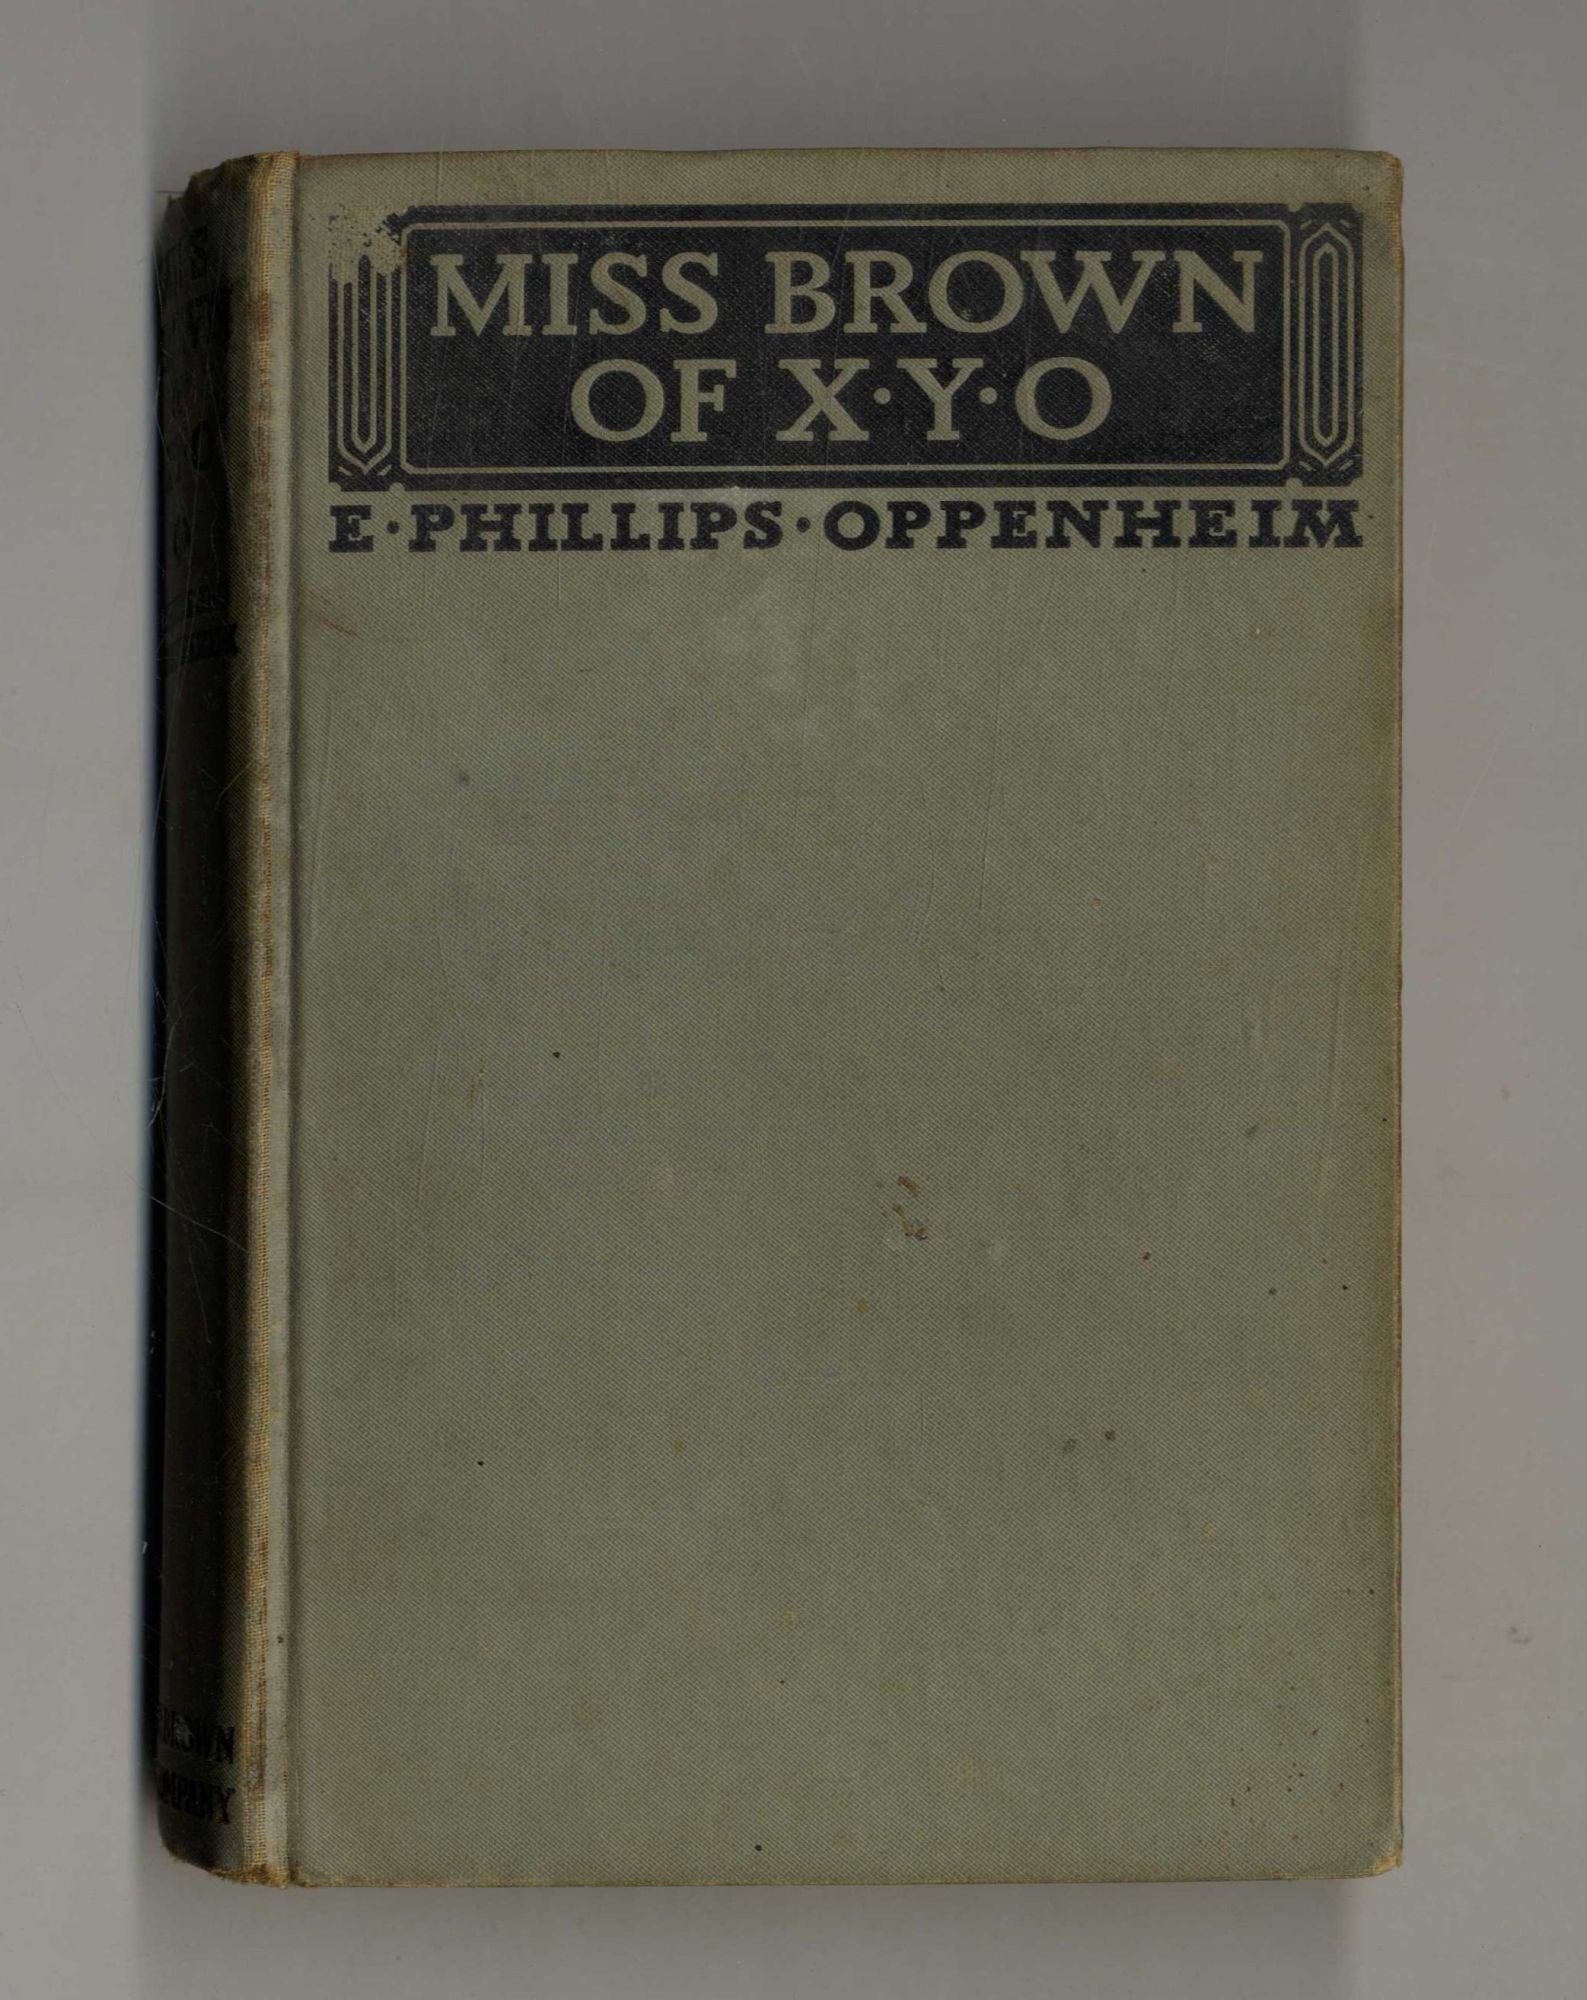 Book #160084 Miss Brown of X. Y. O. E. Phillips Oppenheim.